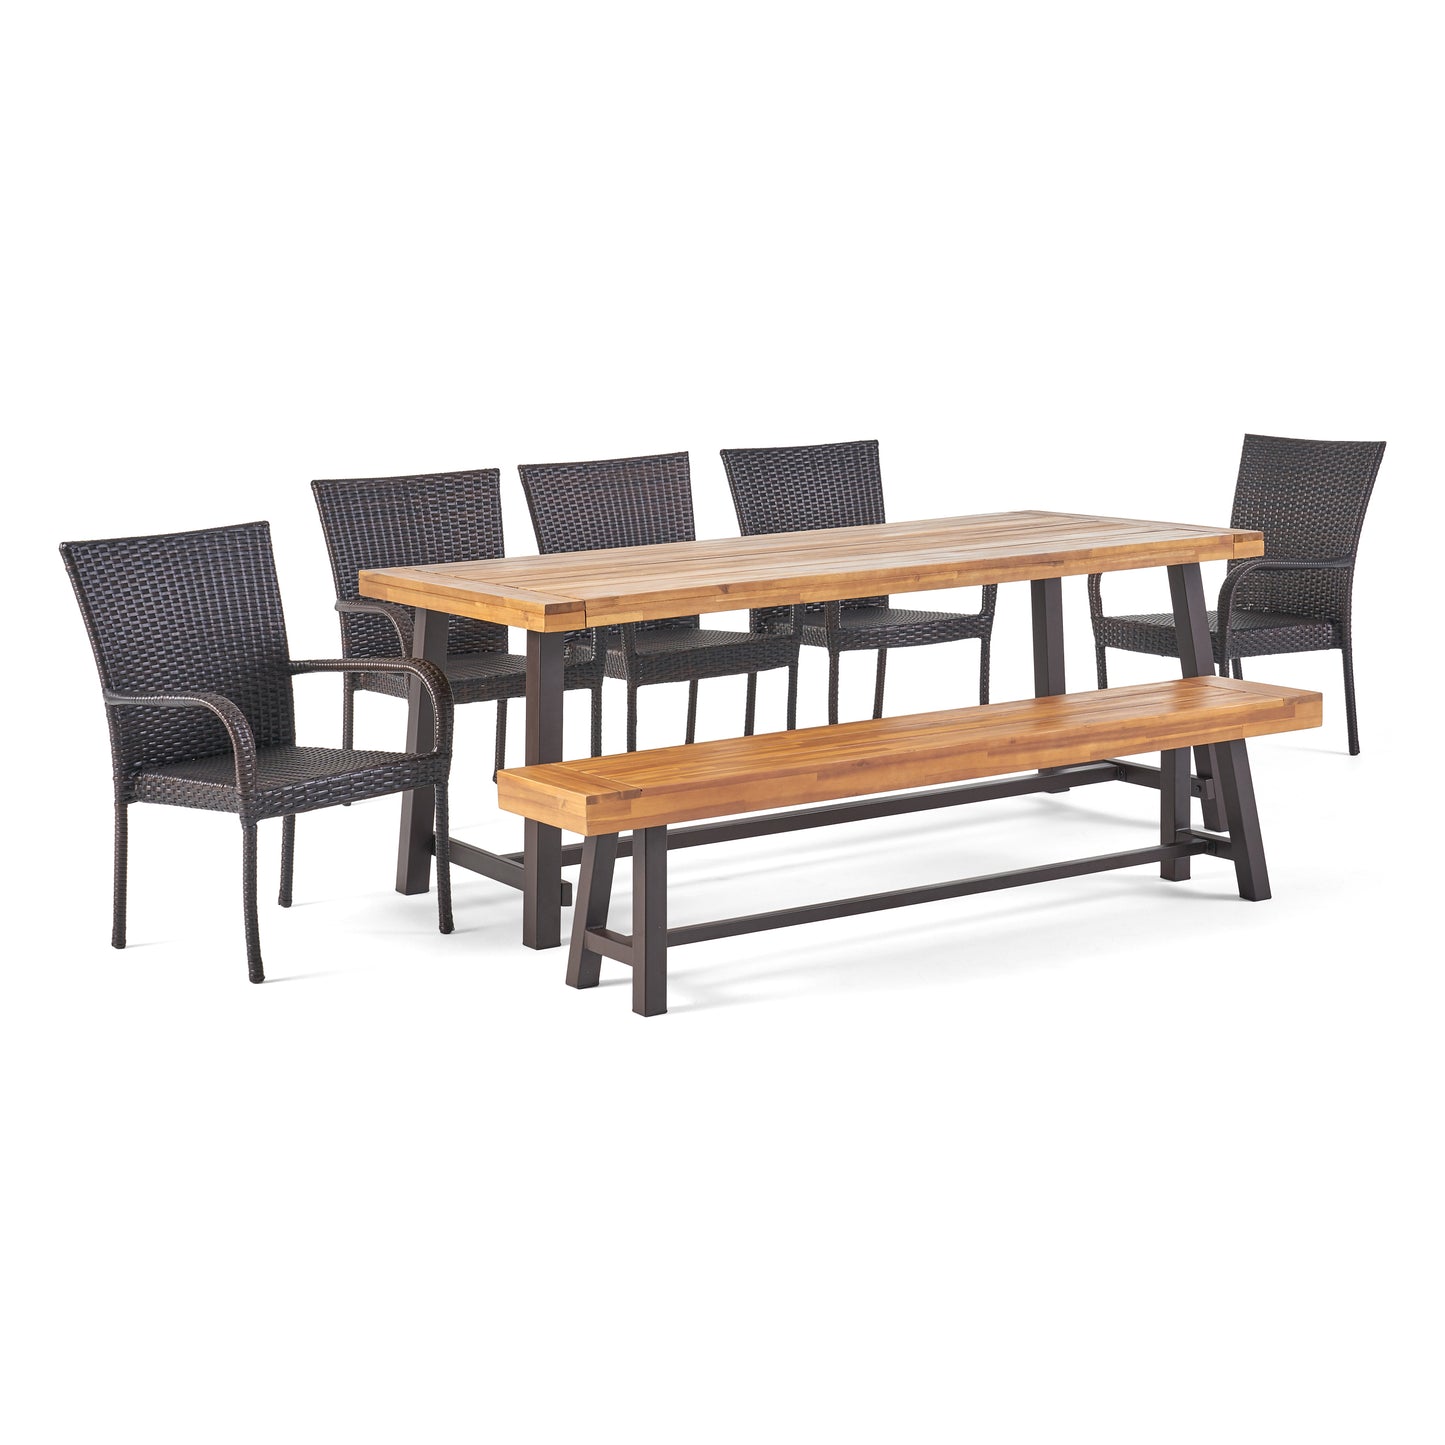 Gryphon Outdoor Rustic Acacia Wood 8 Seater Dining Set with Dining Bench